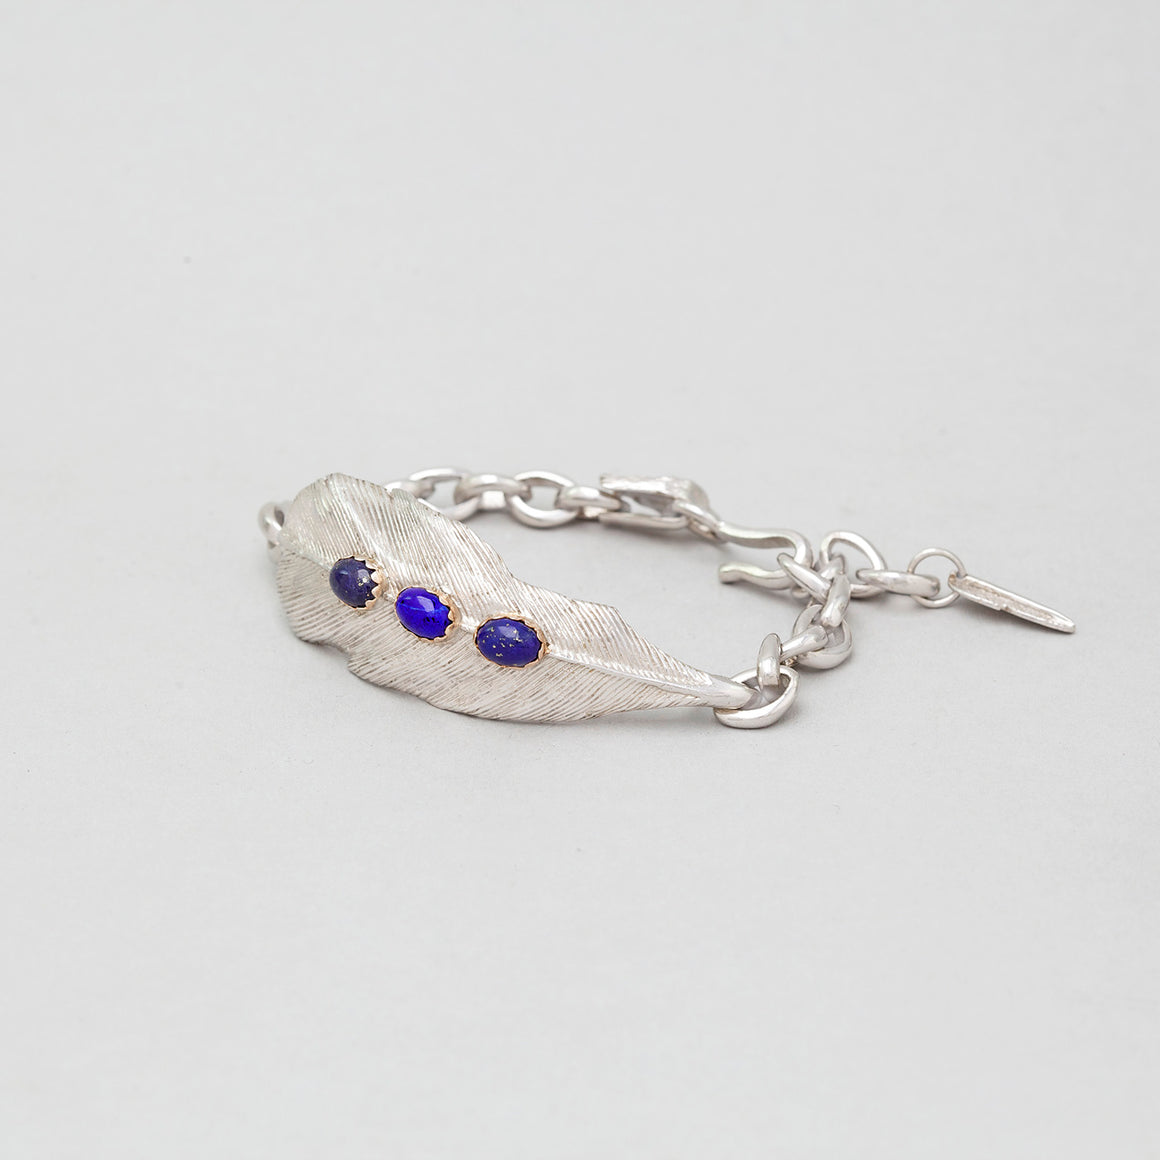 STERLING SILVER FEATHER CHAIN LINK BRACELET WITH LAPIS ACCENT IN GOLD CAP